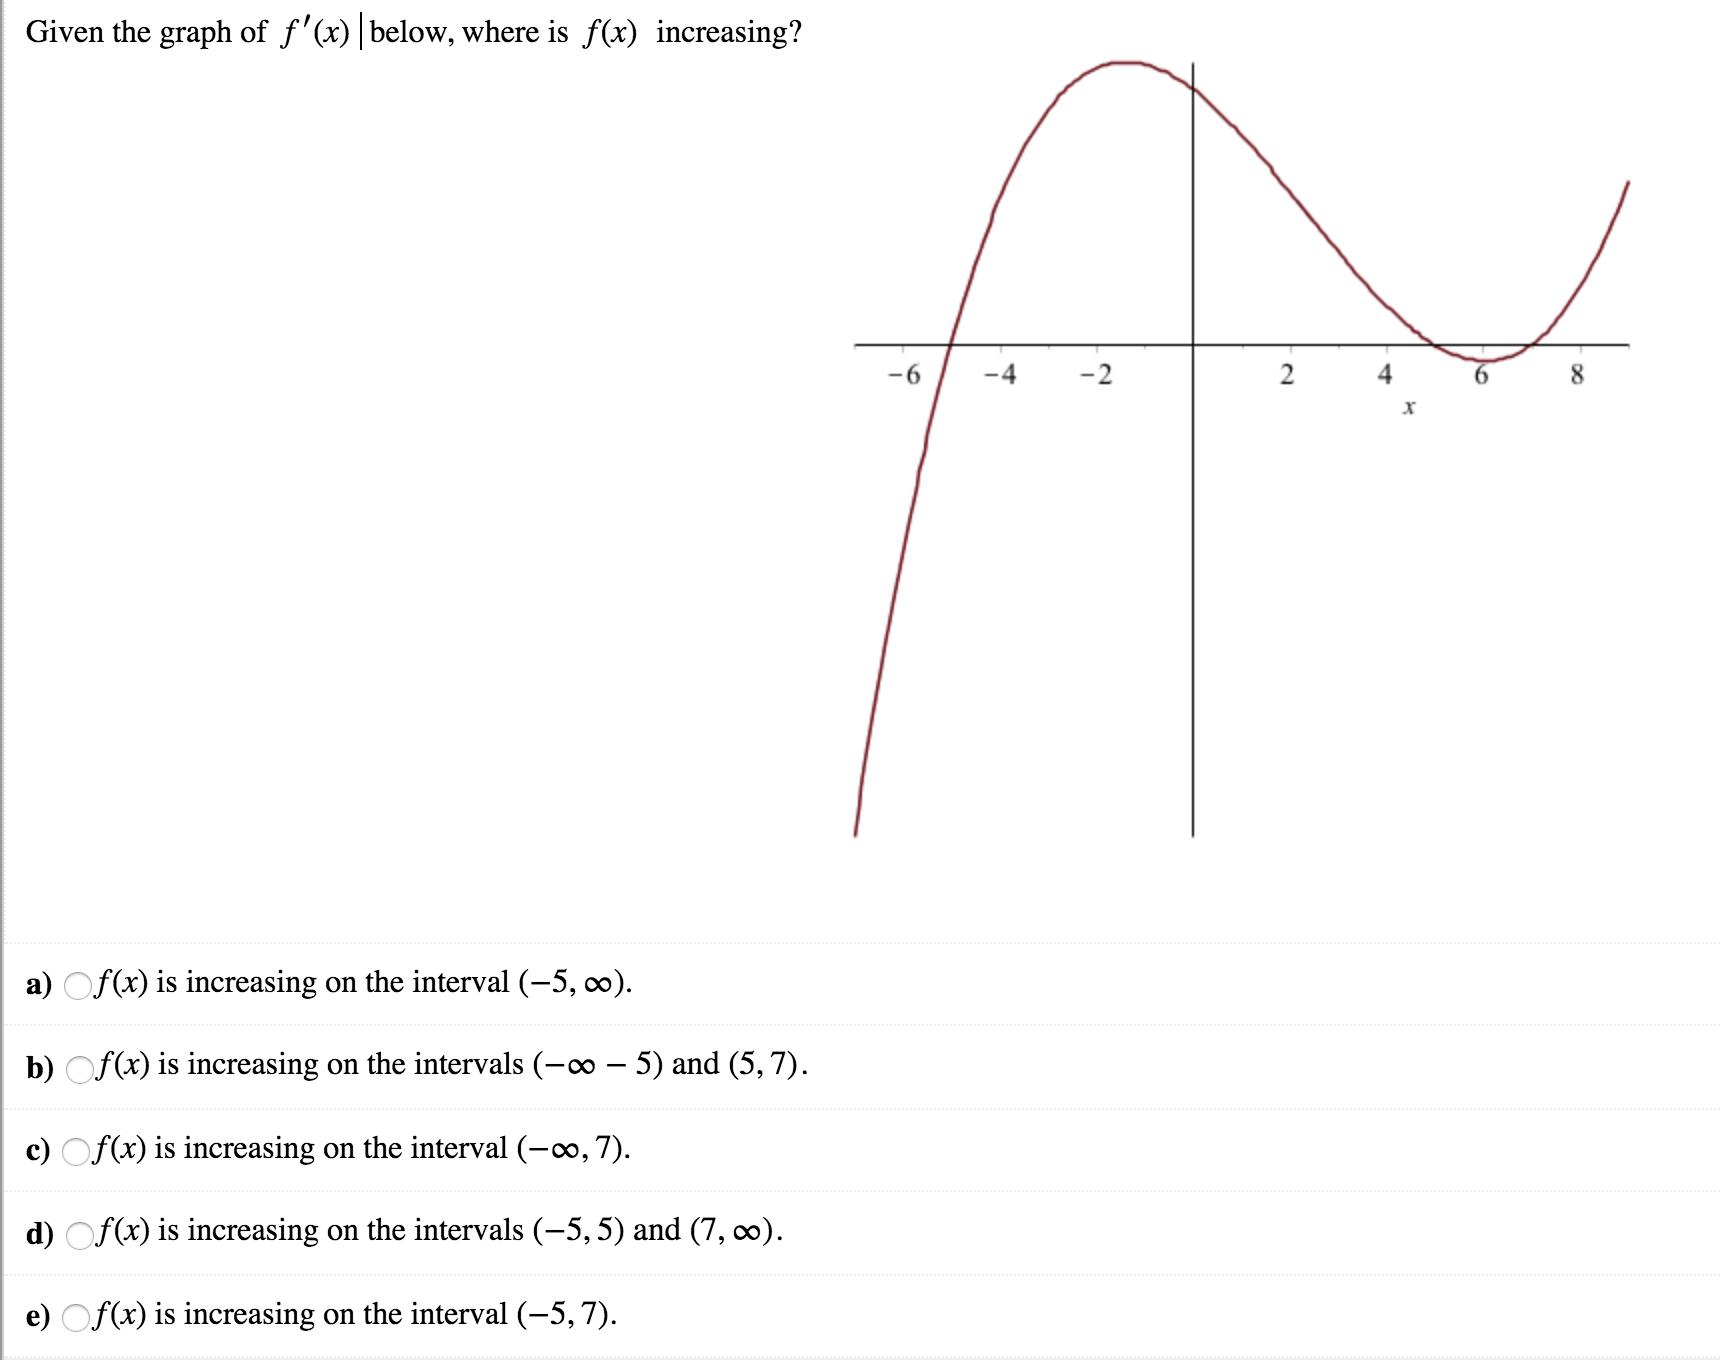 Given the graph of f'(x) below, where is fx) increasing?
6
4
4
6
a) Of(x) is increasing on the interval (-5, oo)
b) Of(x) is increasing on the intervals (-oo - 5) and (5,7)
c Of
d) Of(
e) Of(x) is increasing on the interval (-5,7)
(x) is increasing on the interval (-00,7)
(x) is increasing on the intervals (-5,5) and (7, co)
